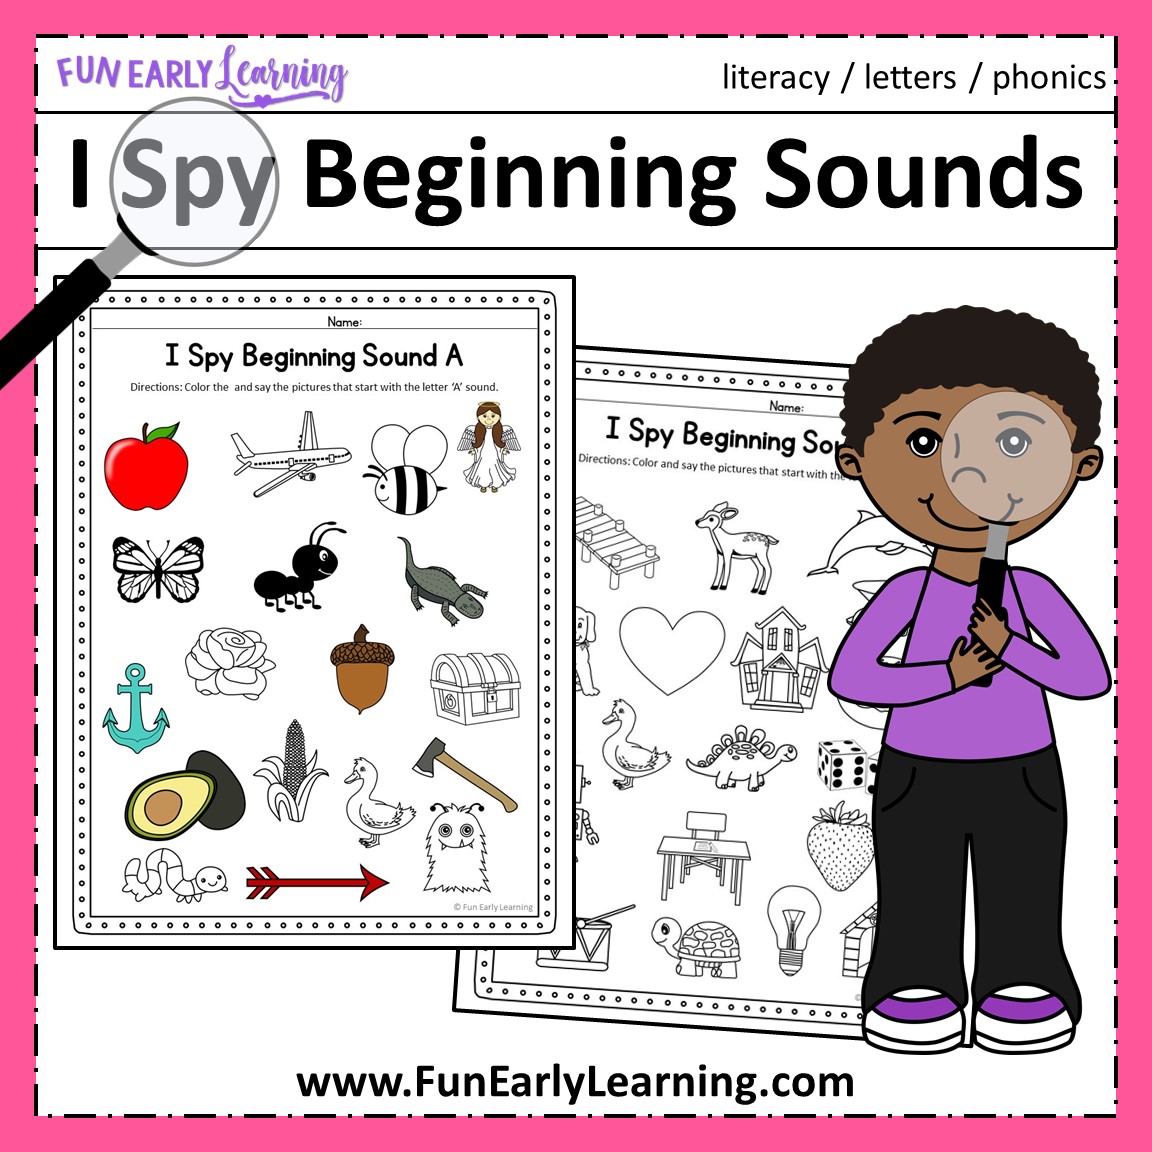 i spy beginning sounds activity free printable for speech and apraxia